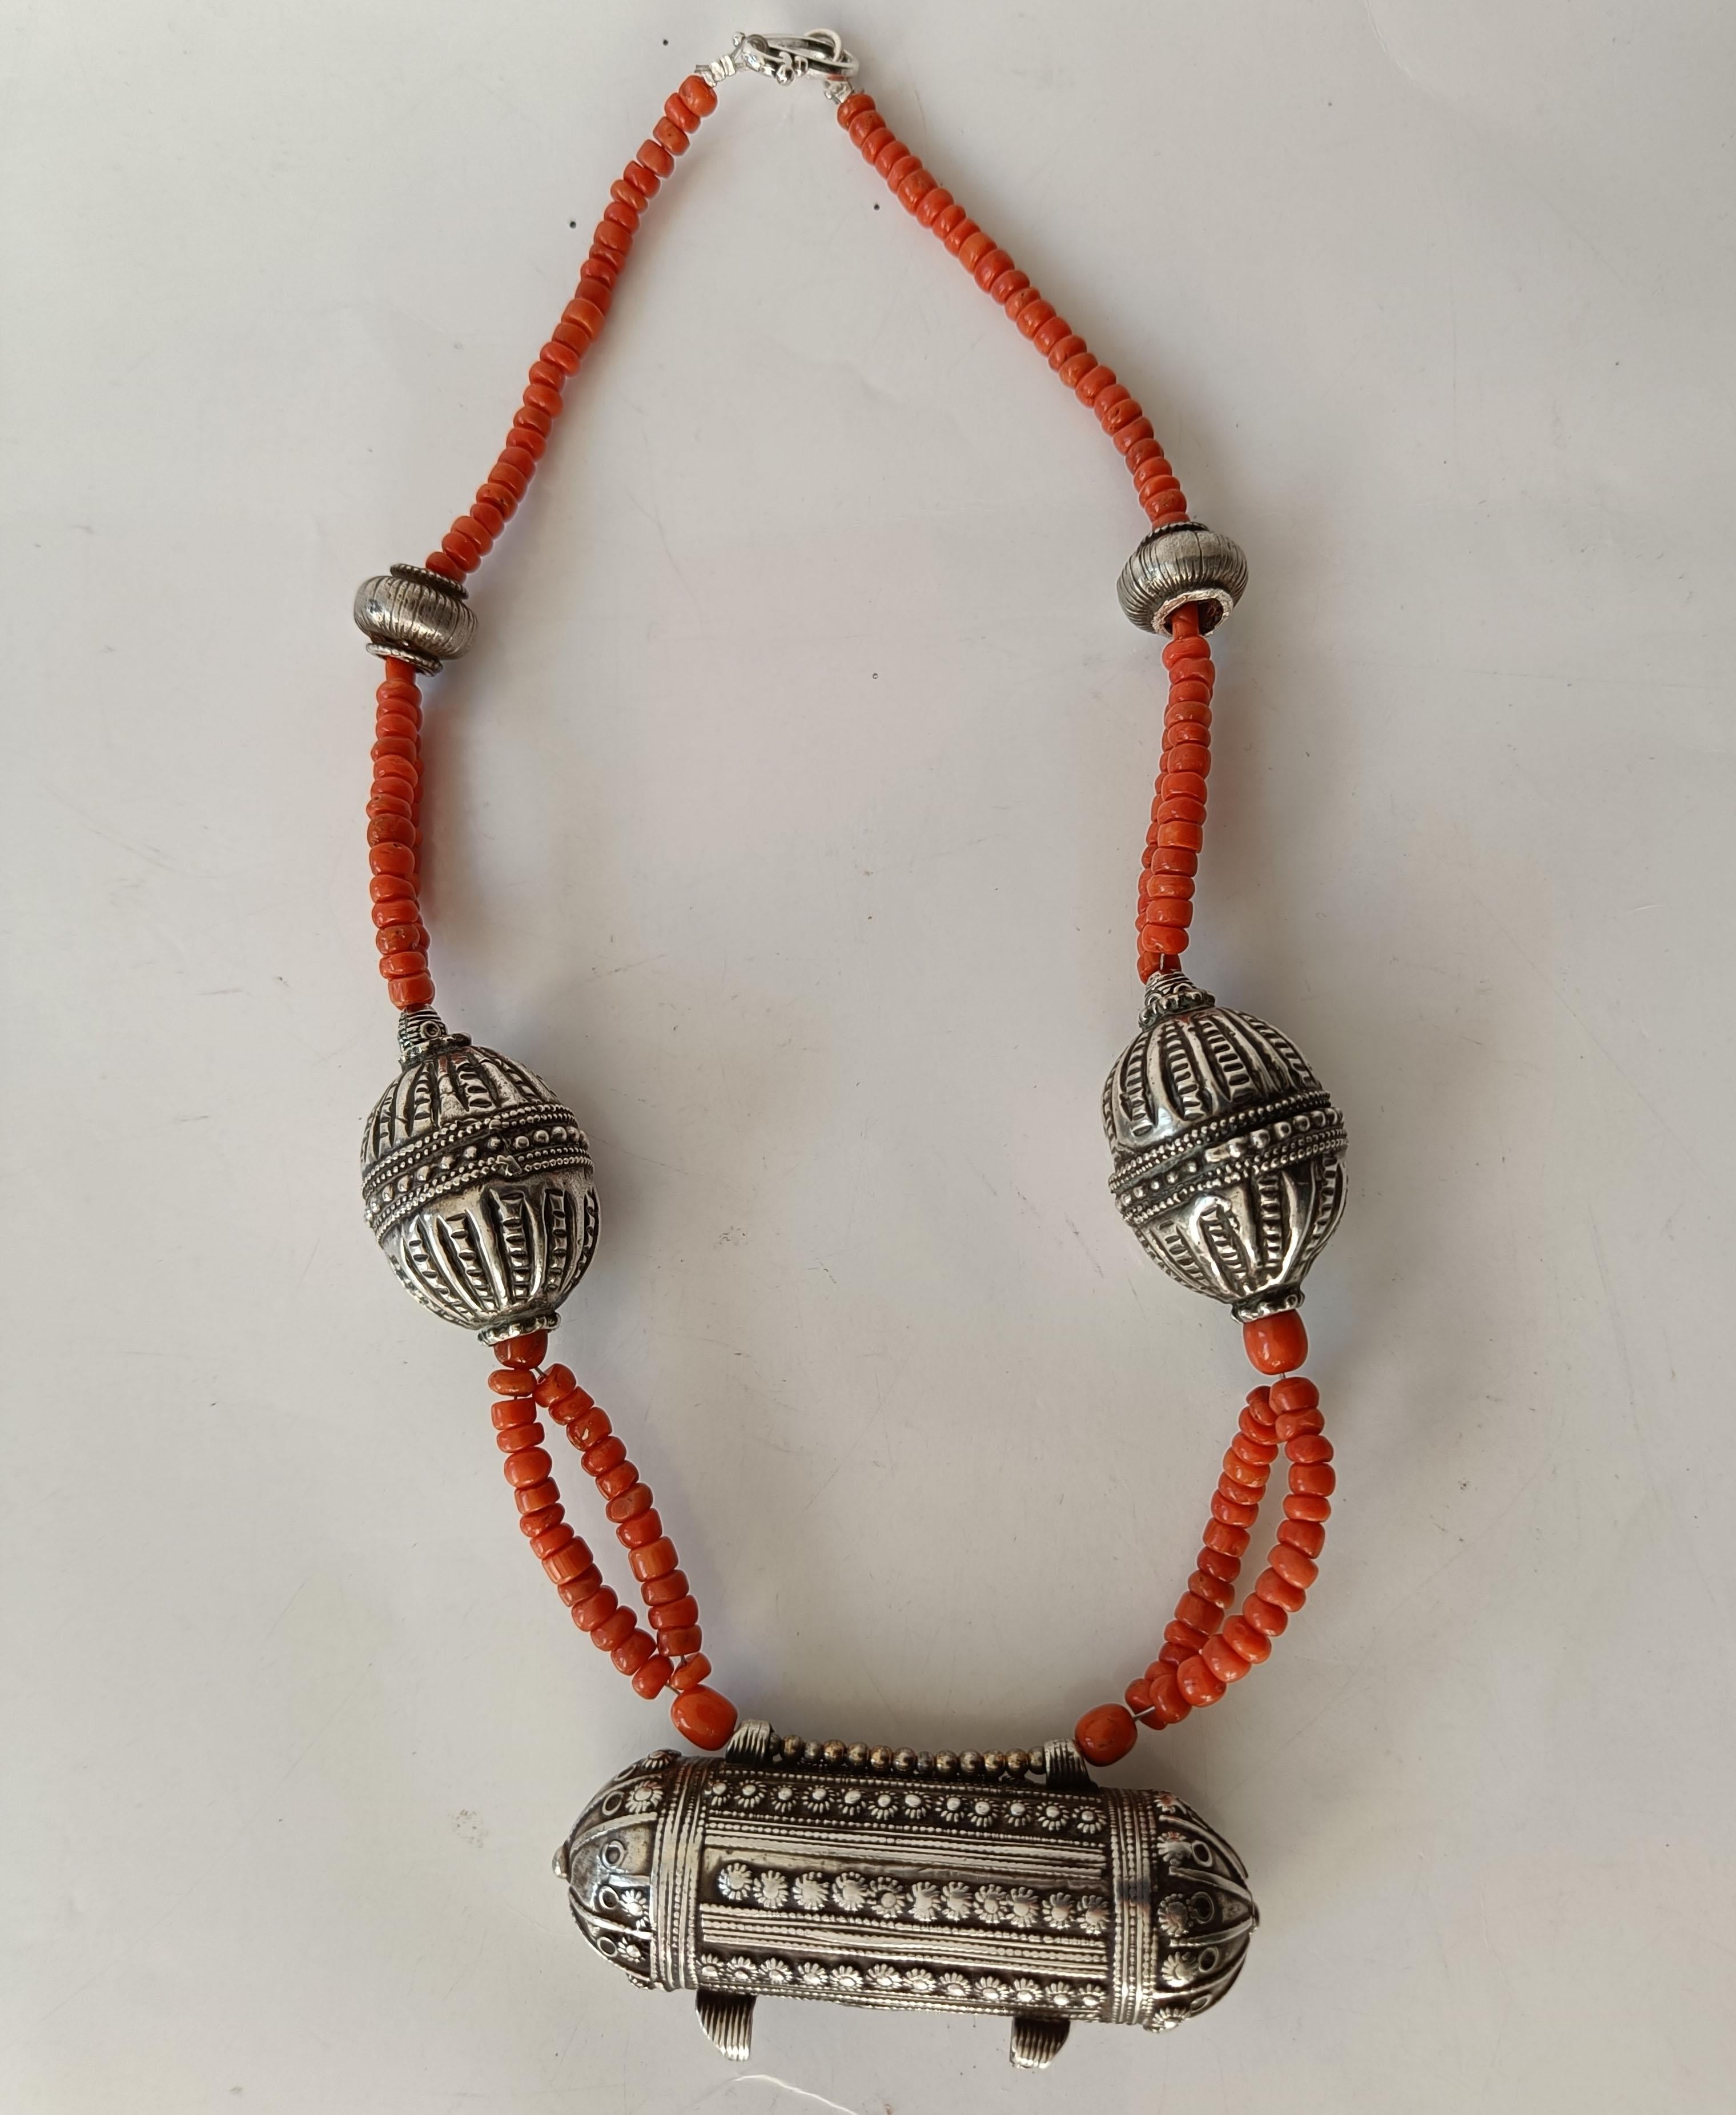 Long Large Silver bead and coral necklace Yemen 
Double row coral with large silver beads 
Period: Early/mid-20th century.
Overall length 32 inches, 81 cm
Silver bead size 1 3/4 x 1  1/4 inches 4.5 x 3 cm#
coral beads 3-4 mm
 